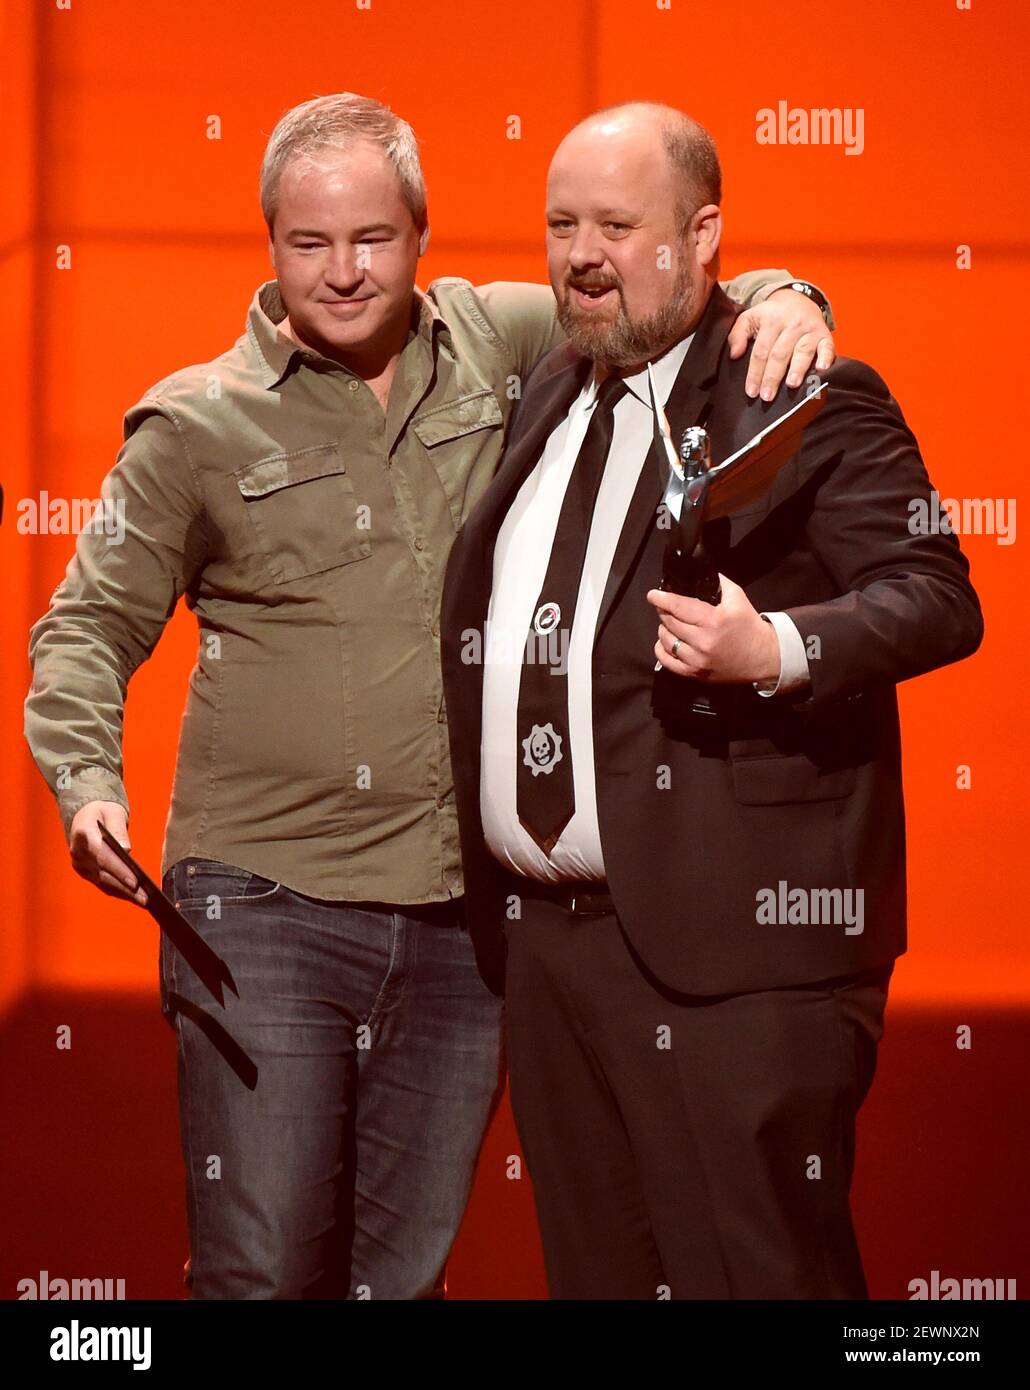 LOS ANGELES, CA - DECEMBER 1: Aaron Greenberg (R) accepts the Best Sports/Racing Game award for "Forza Horizon 3" from Vince Zampella onstage at The Game Awards 2016 at the Microsoft Theater on December 1, 2016 in Los Angeles, California. (Photo by Frank Micelotta/PictureGroup) *** Please Use Credit from Credit Field *** Stock Photo